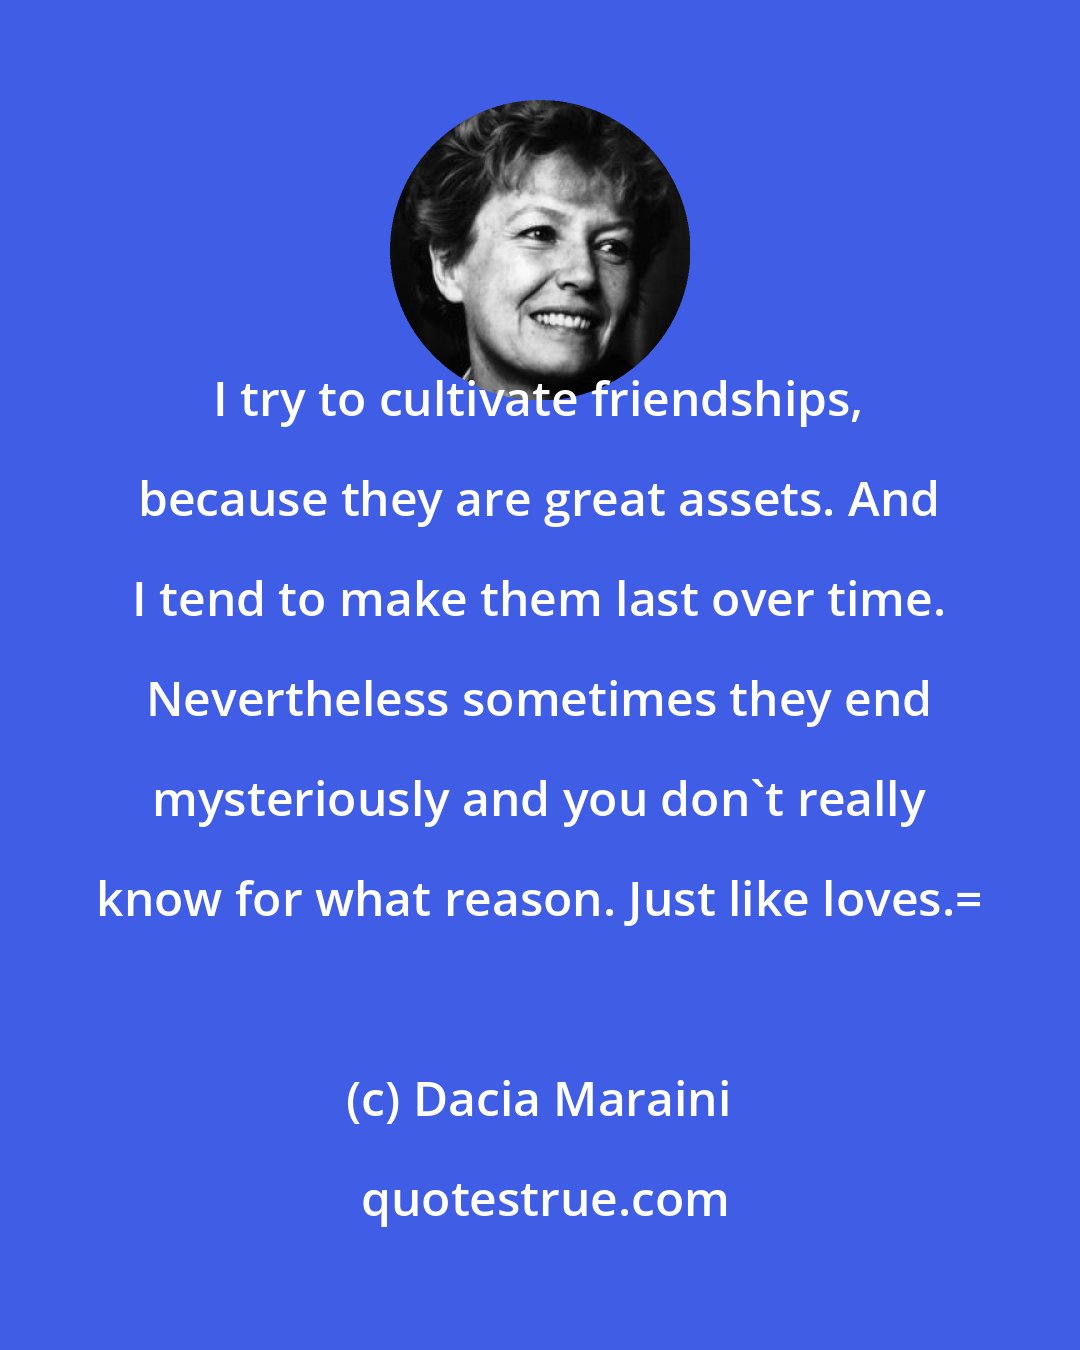 Dacia Maraini: I try to cultivate friendships, because they are great assets. And I tend to make them last over time. Nevertheless sometimes they end mysteriously and you don't really know for what reason. Just like loves.=